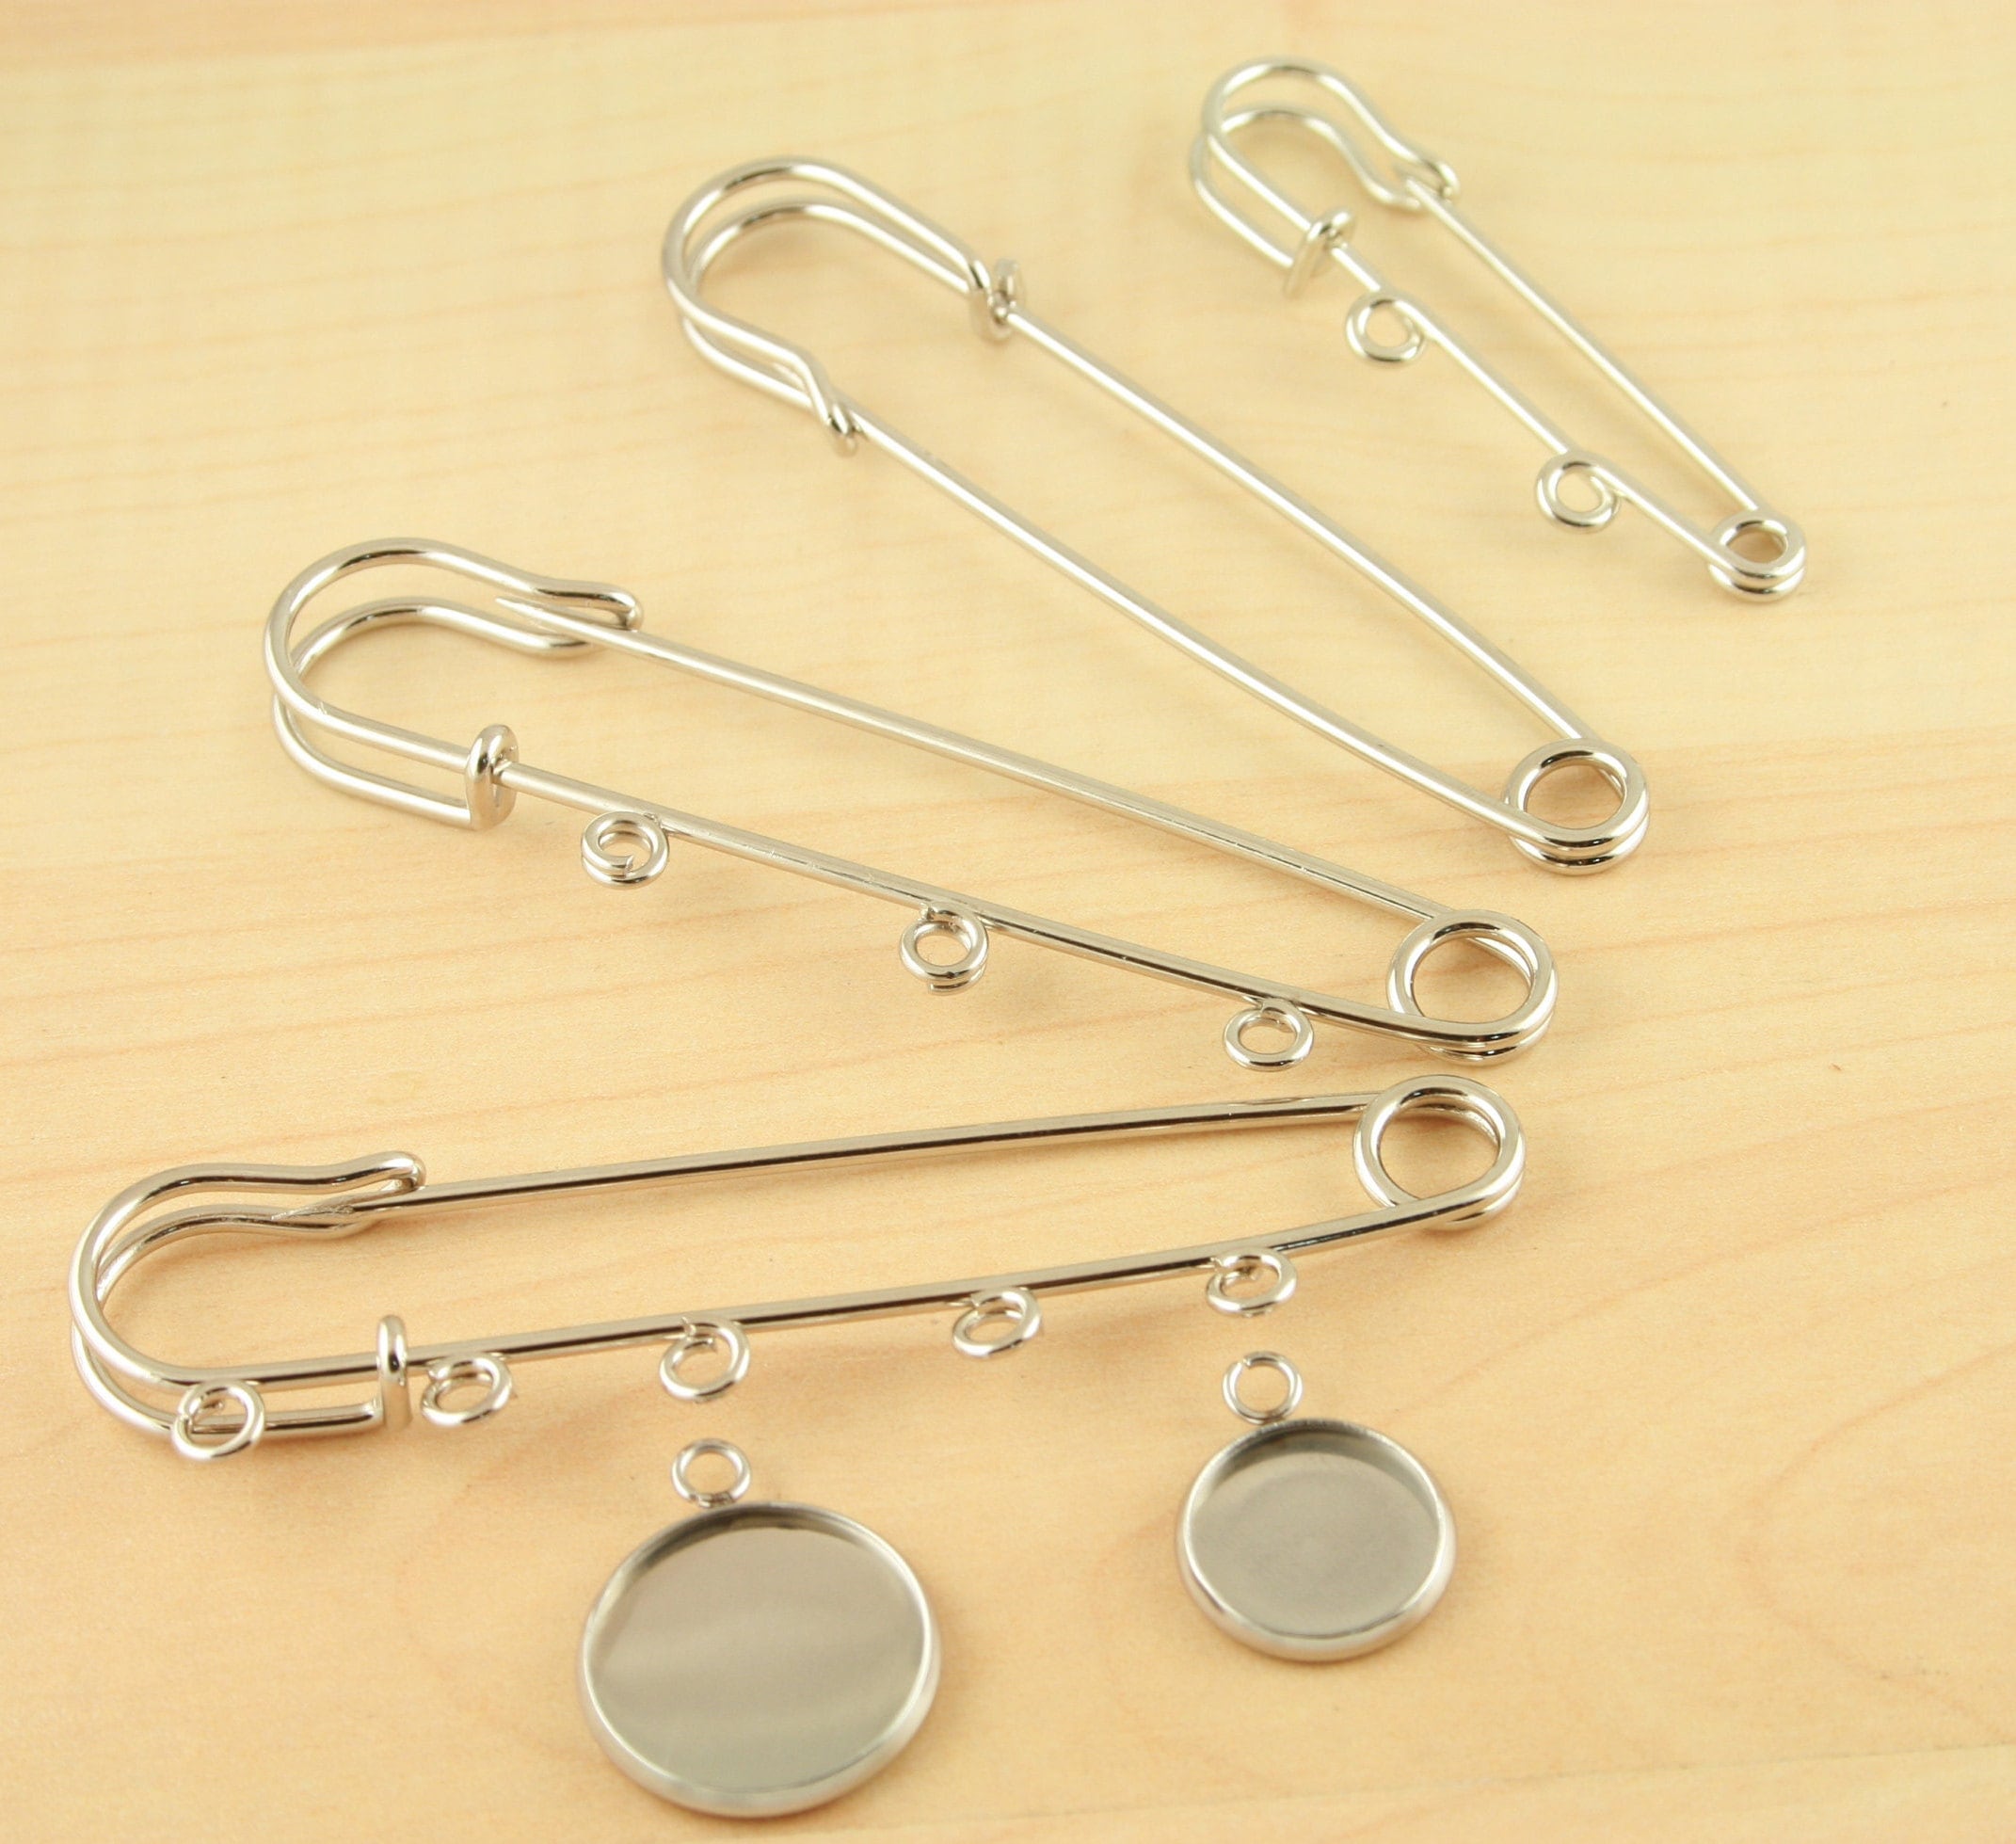 20/50pcs 1 Inch White Safety Pins for Wedding Veils, Pin Corsages